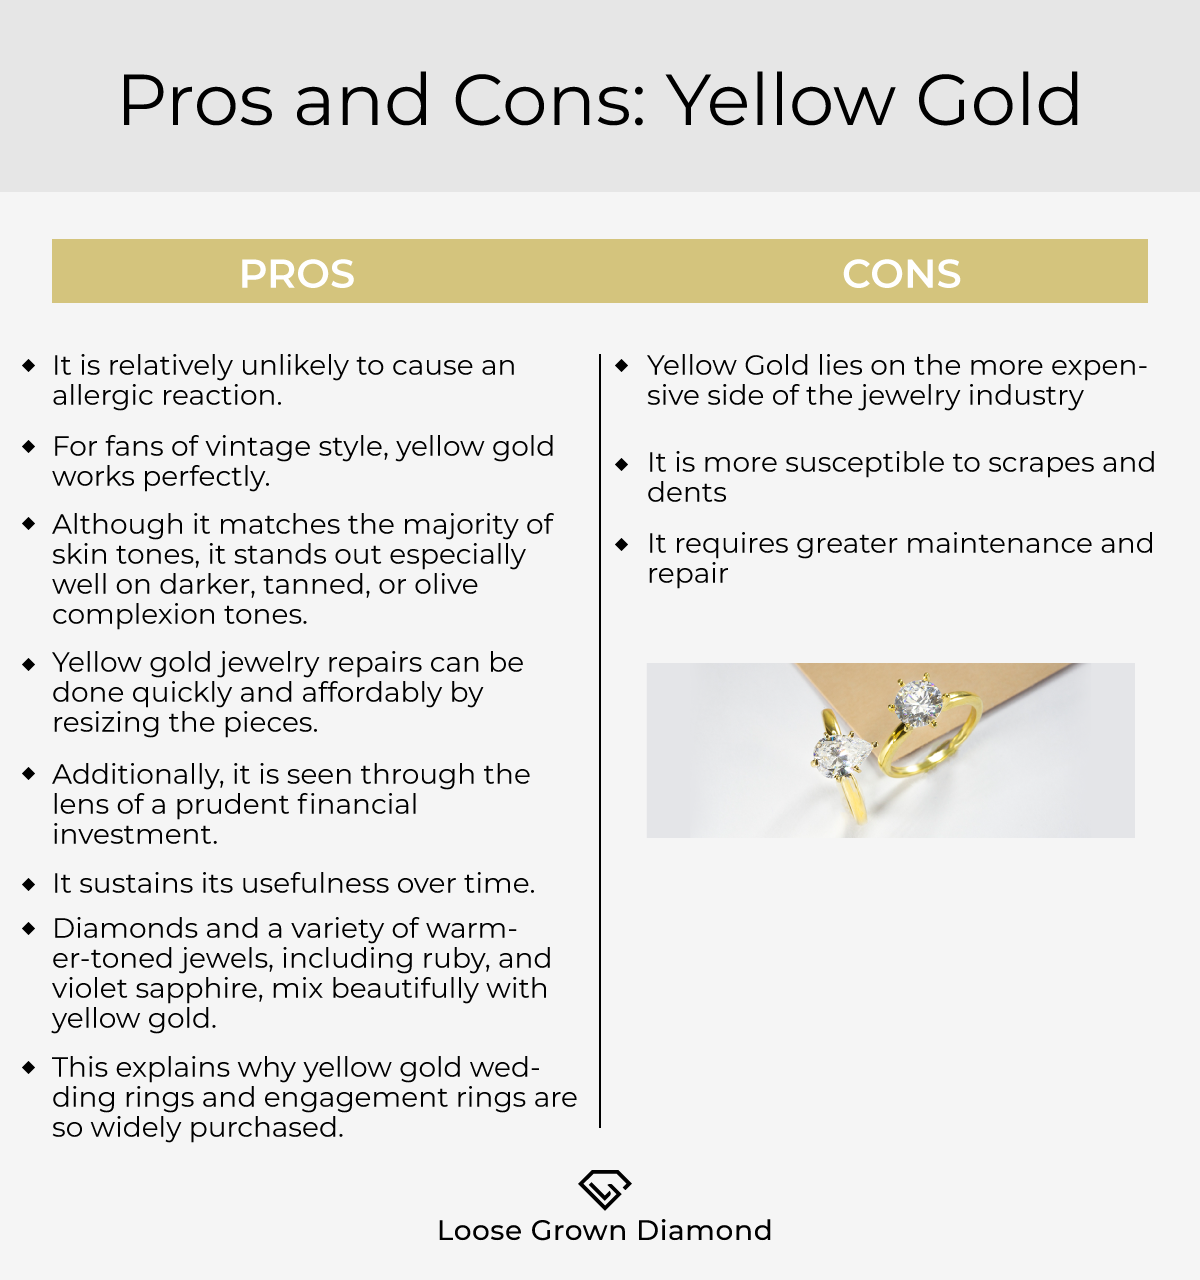 Pros and Cons: Yellow Gold